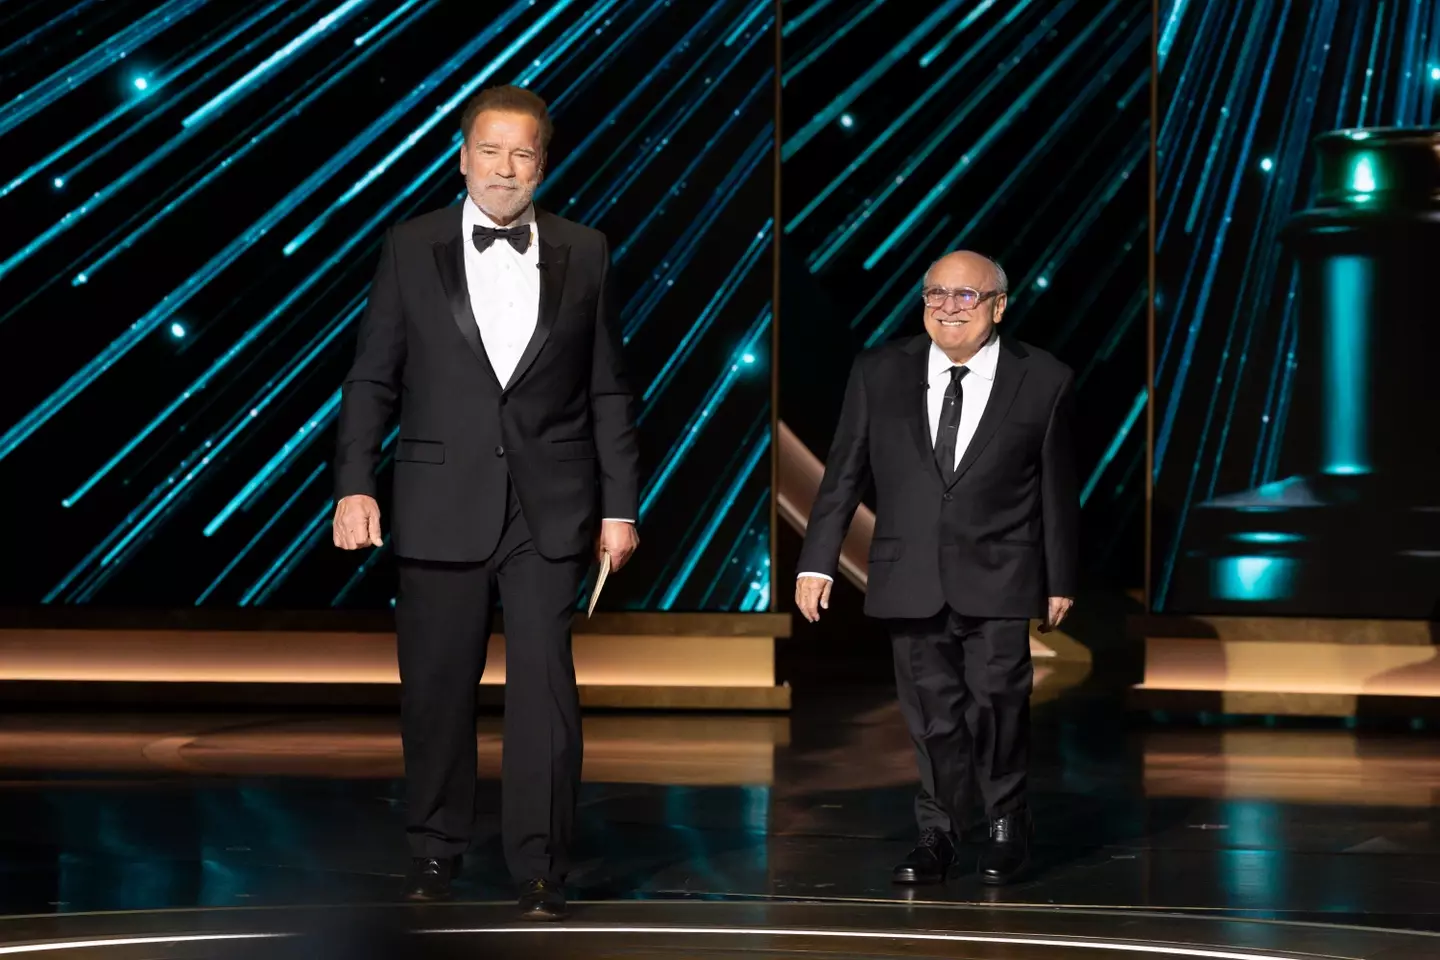 Arnold Schwarzenegger and Danny DeVito hosted an award together at the Oscars.